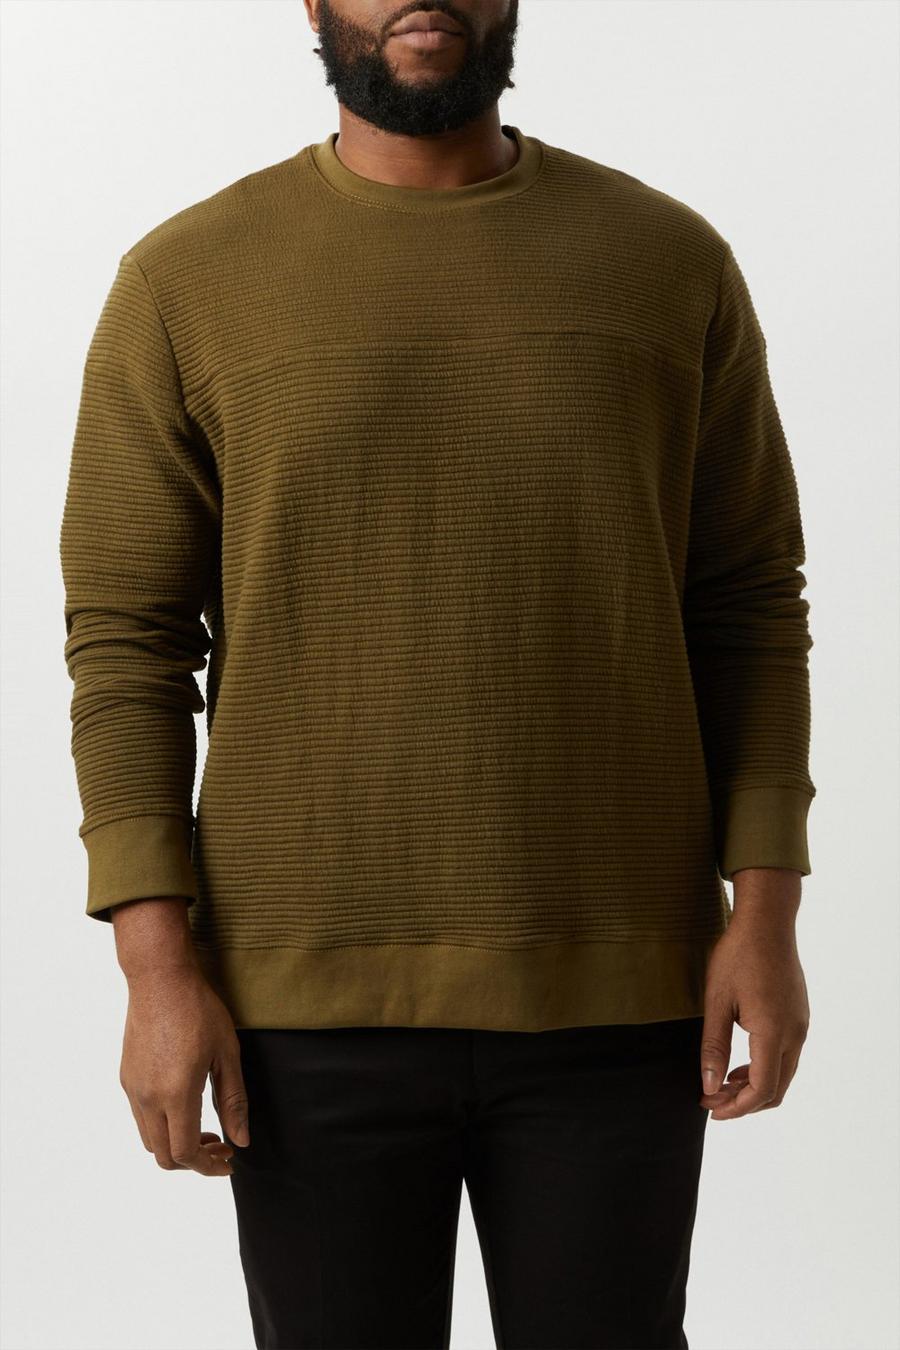 Plus and Tall Textured Crew Sweat